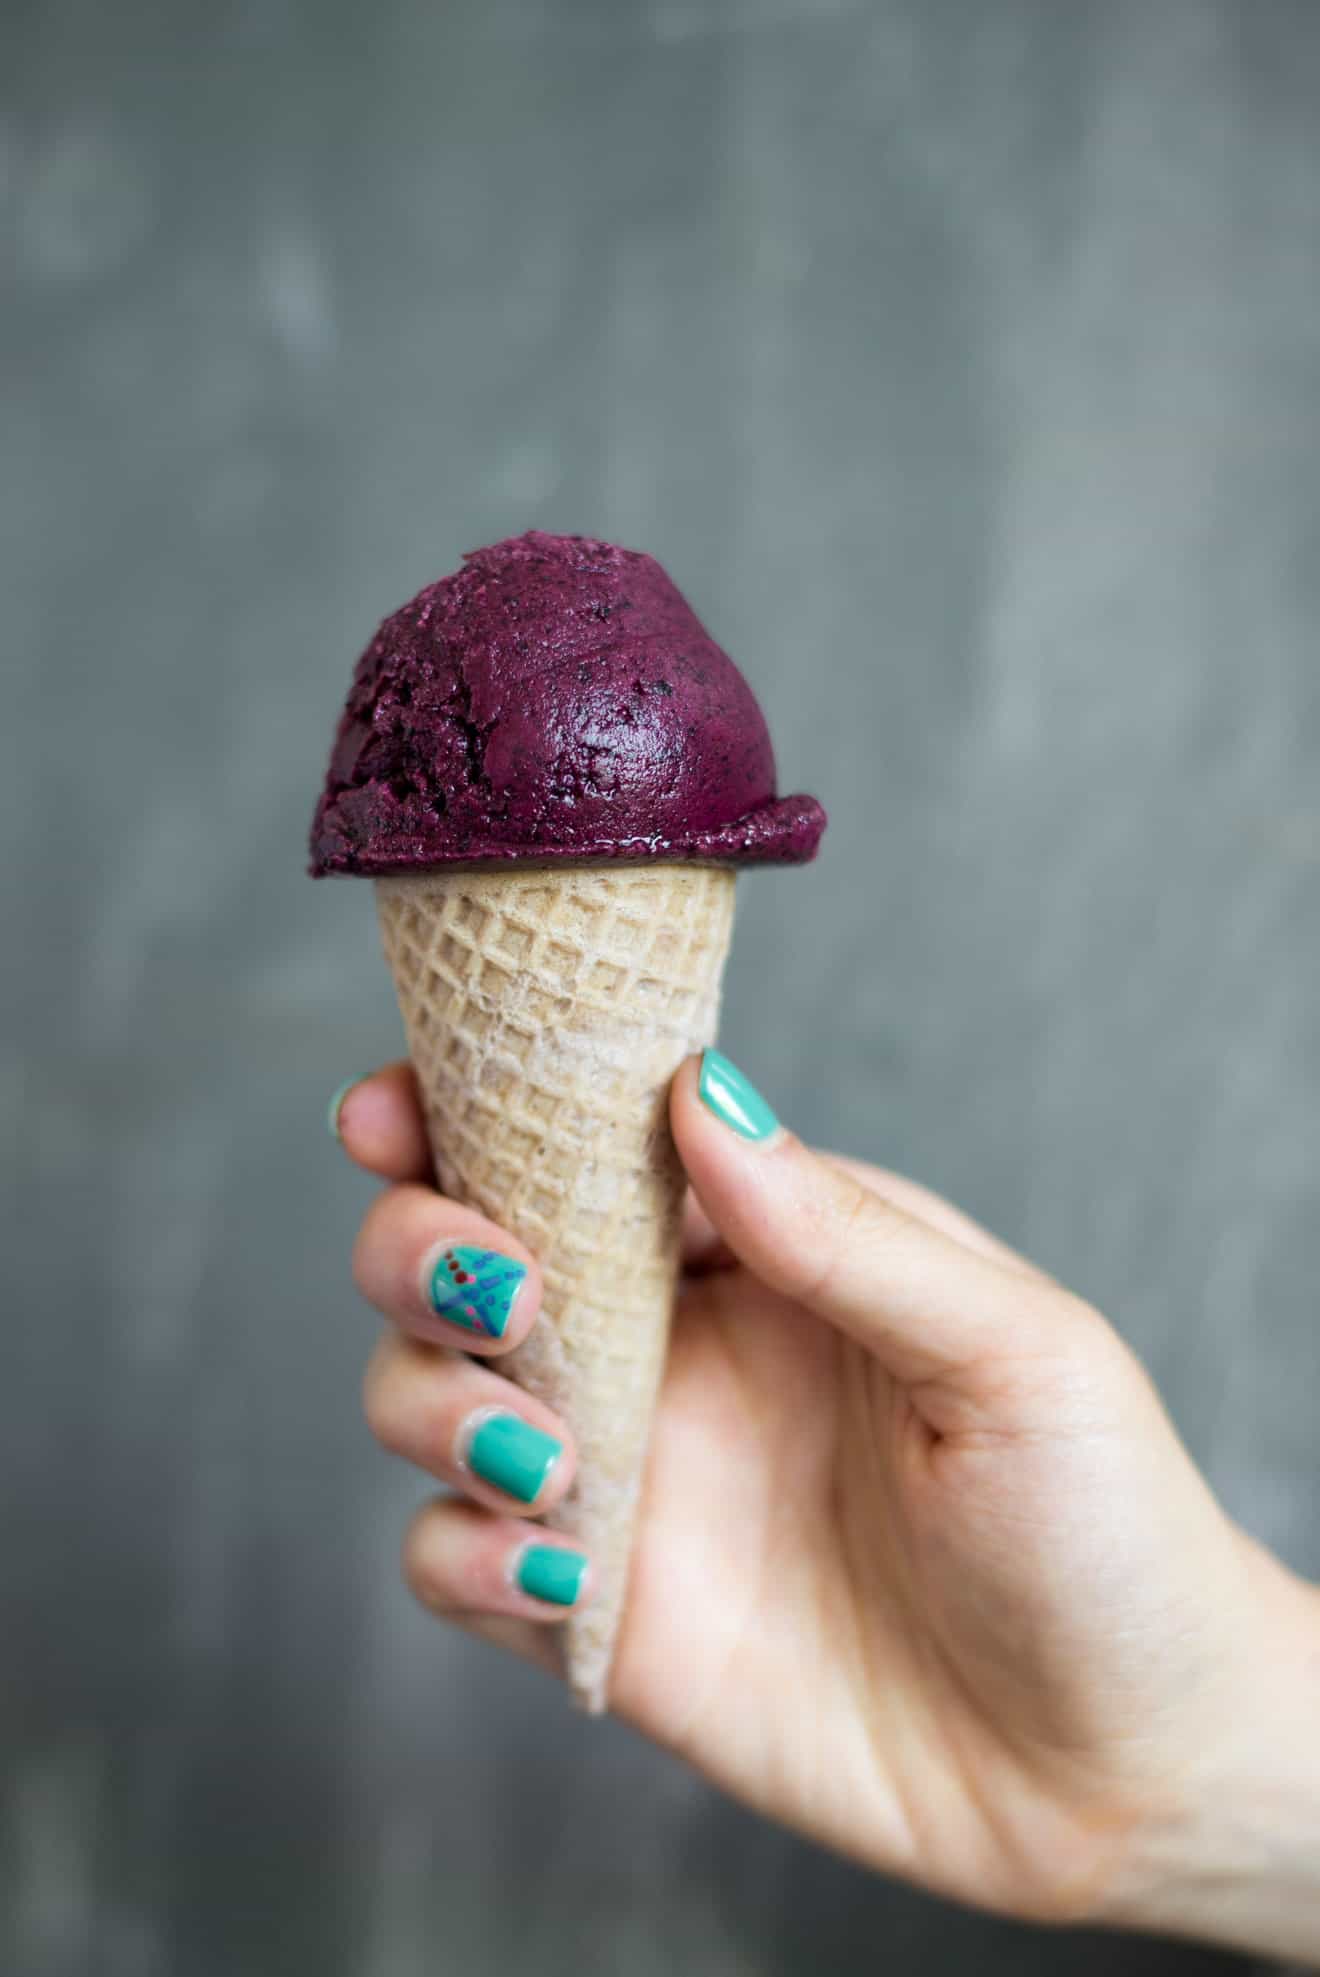 Easy homemade blueberry frozen yogurt that requires 4 ingredients only! by @healthynibs